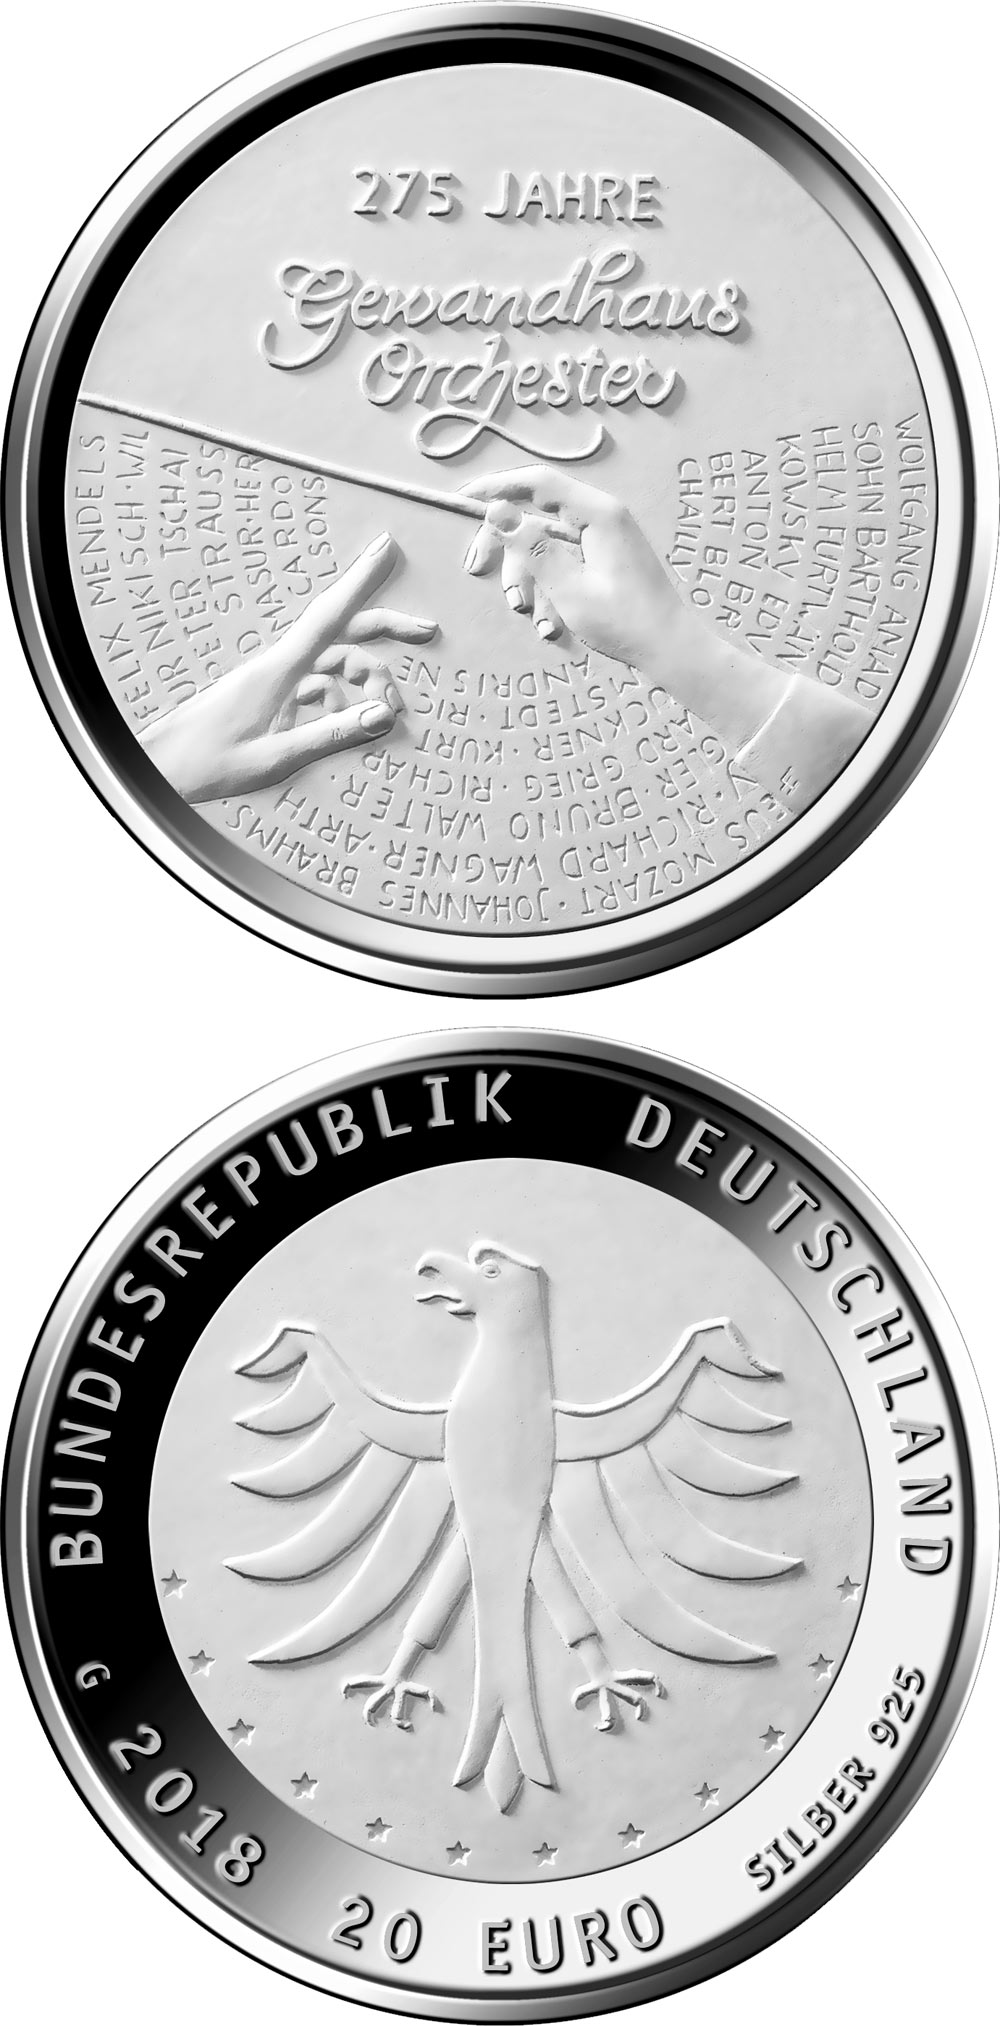 Image of 20 euro coin - 275 Jahre Gewandhausorchester  | Germany 2018.  The Silver coin is of Proof, BU quality.